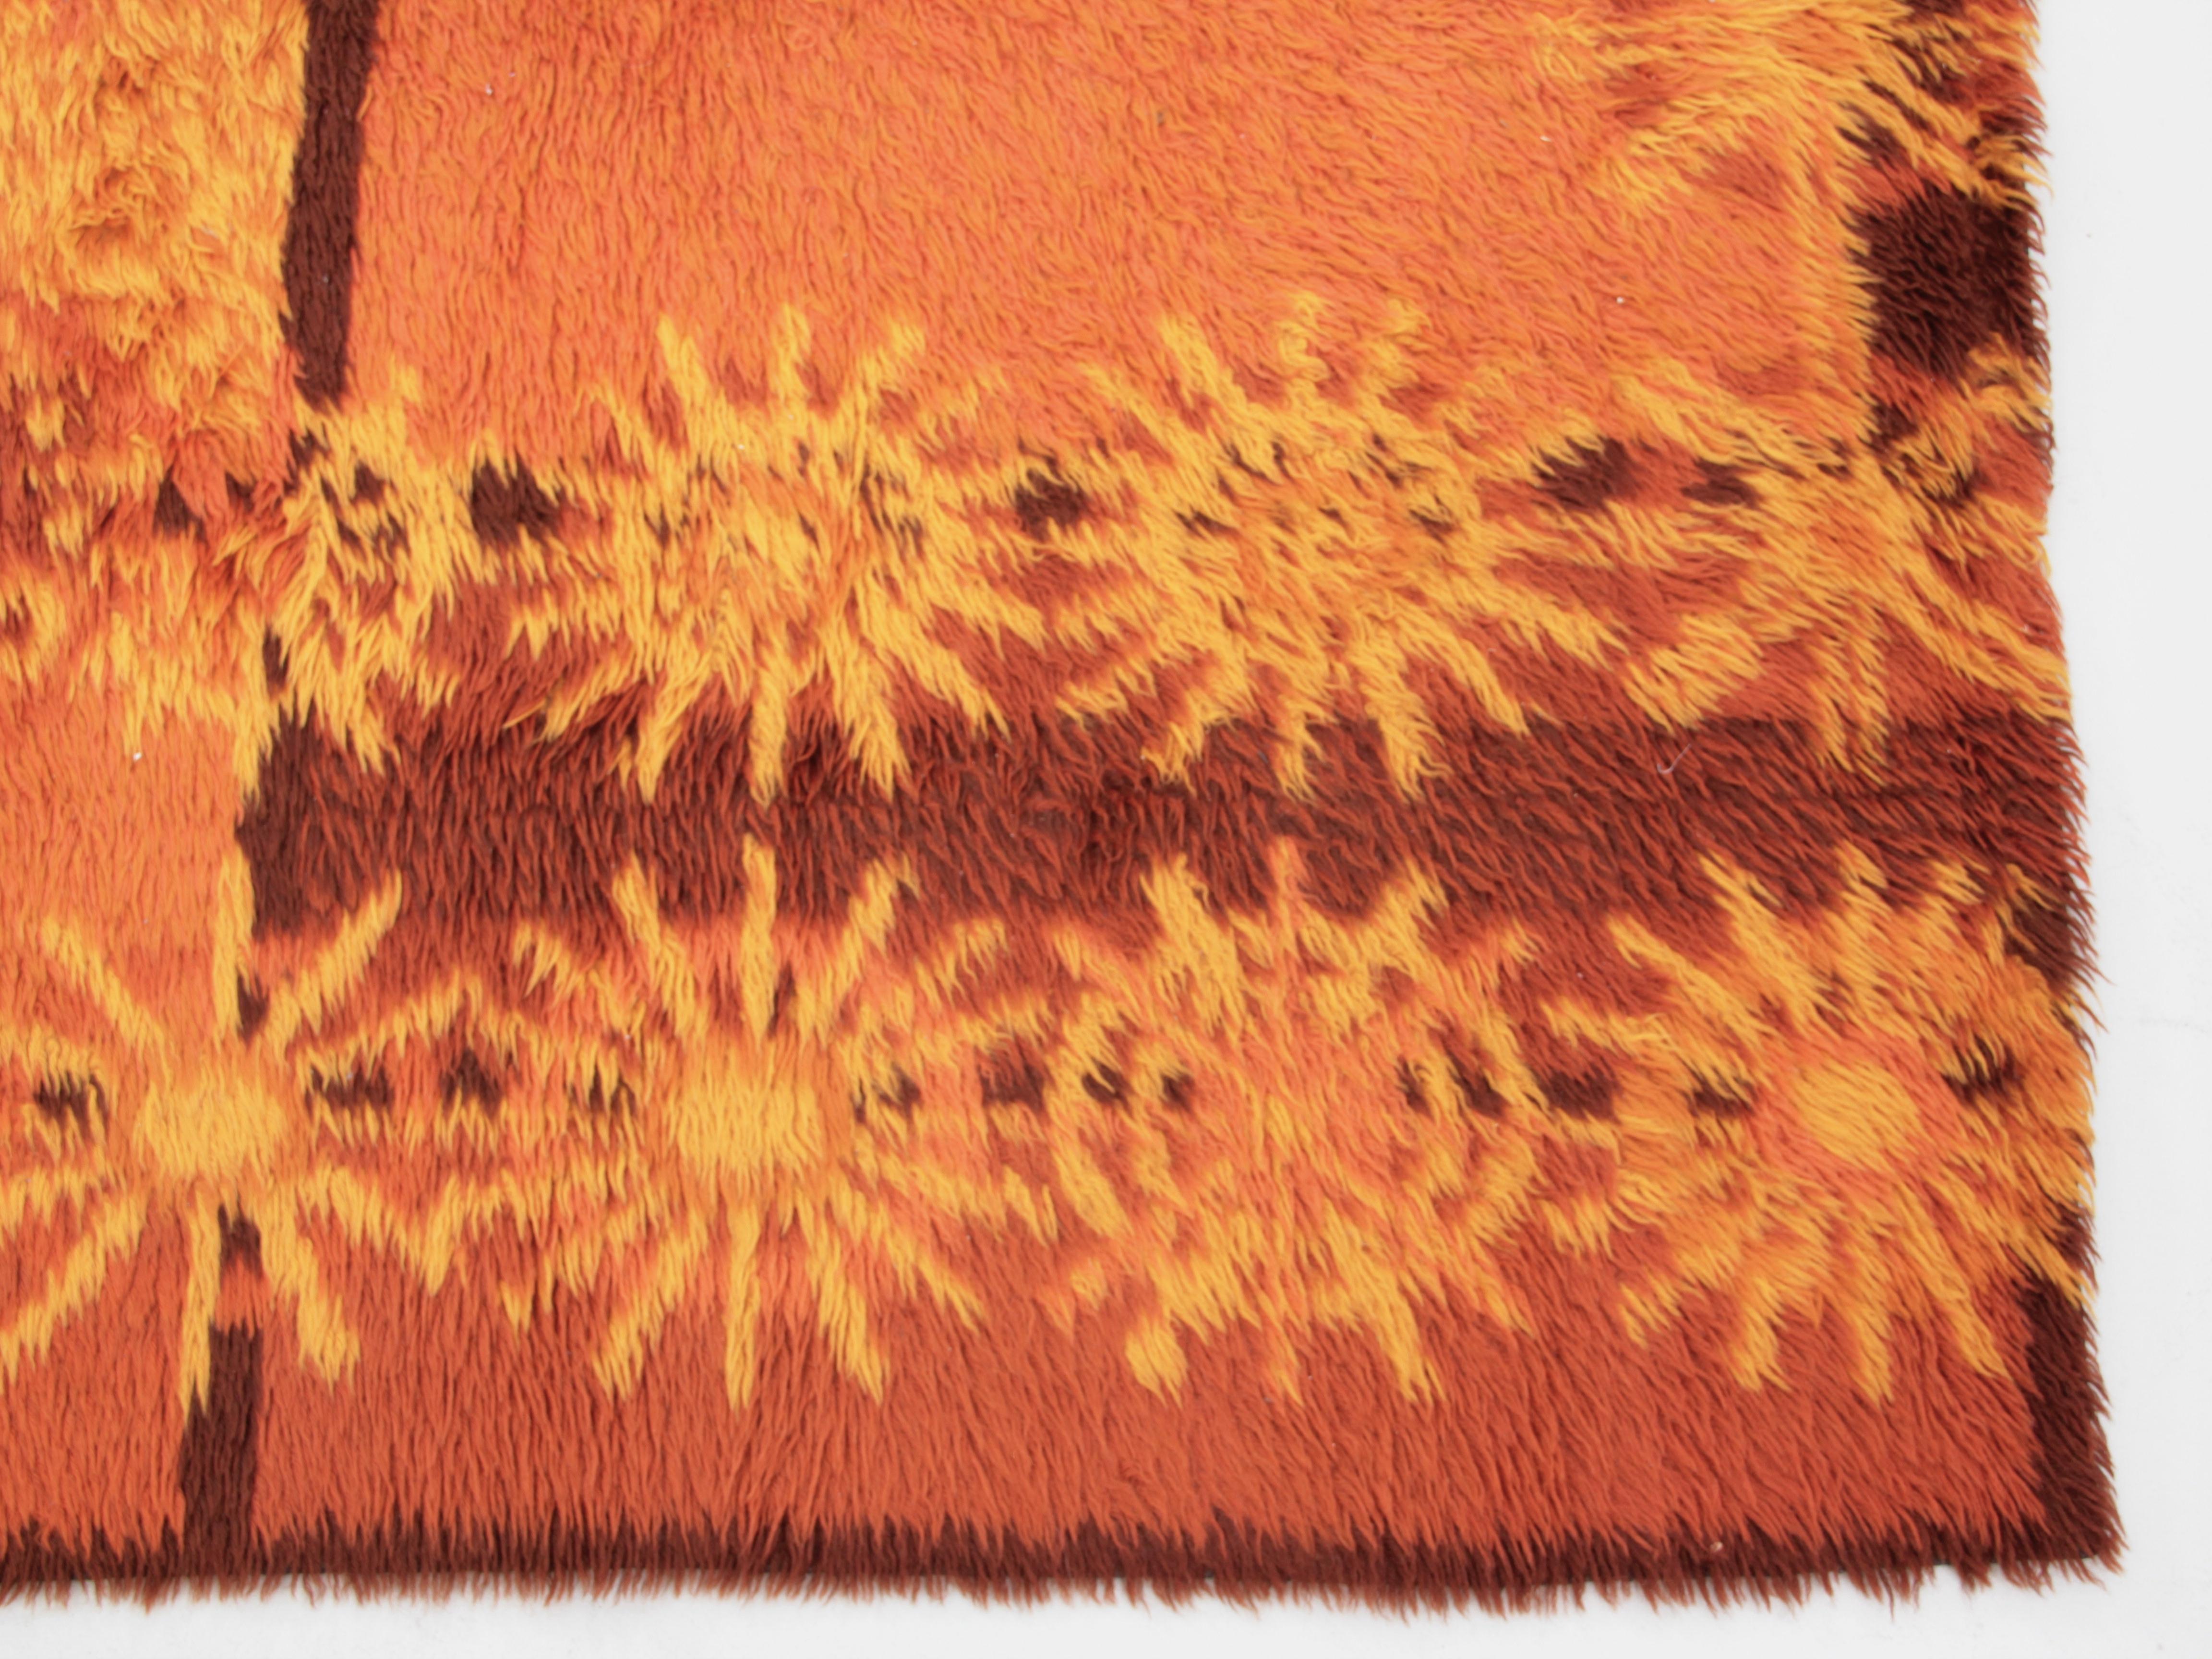 Rya rugs in wool with yellow motifs 200 x 156 cm

A Rya is a traditional Swedish carpet made of virgin wool of Icelandic sheep strands of a length of about 2-5 cm. Originally, the Rya was a big cover used by sailors to replaced the fur. Over time,